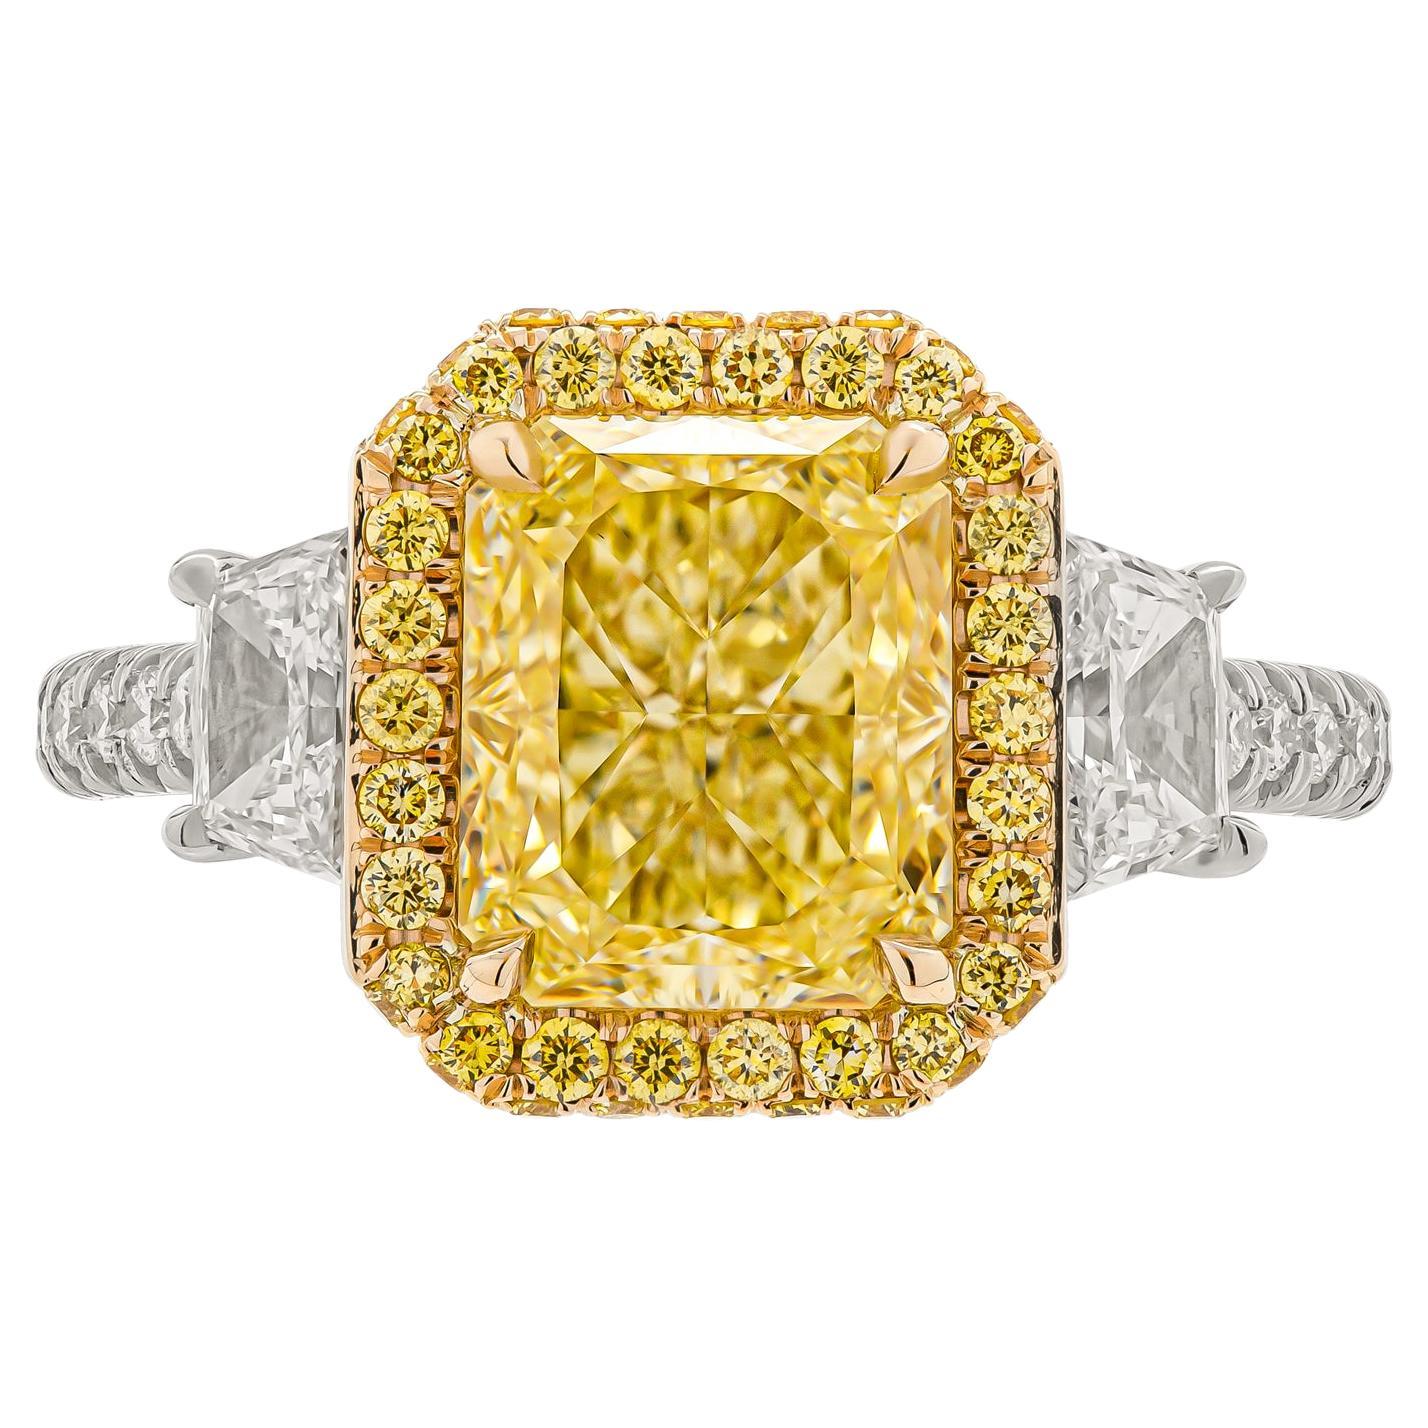 Engagement ring in 18K YG & PT950 Radian cut Diamond 3.04ct Natural Fancy Light Yellow Even VS2 
Center Stone: Radiant Shape Diamond GIA# 7406066295 3.04ct Natural Fancy Light Yellow Even VS2 Radiant 
Side stones: 0.61ct F VS Trapezoids 
Cathedral